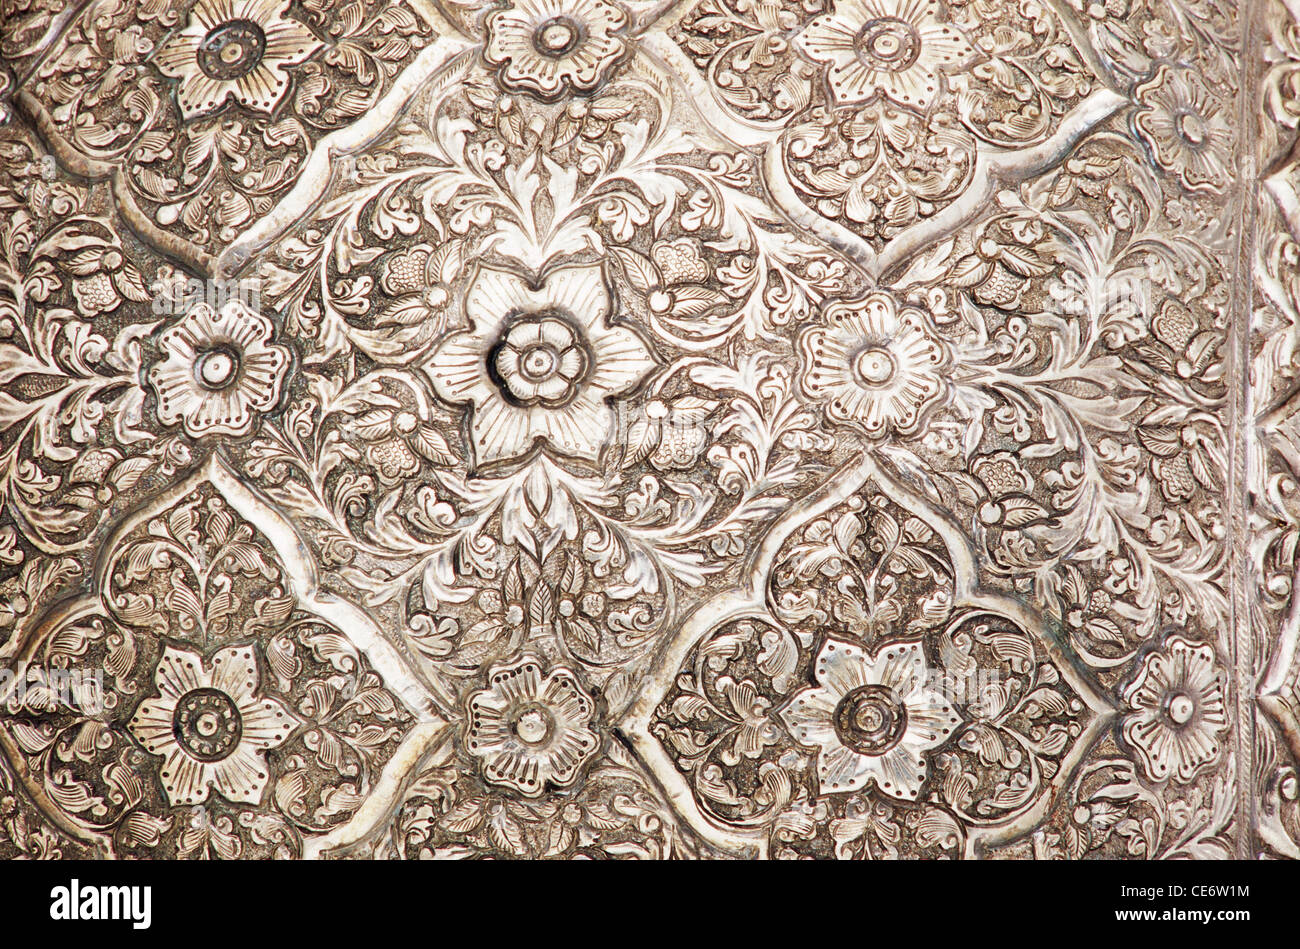 HMA 85202 : floral design carved on silver india Stock Photo